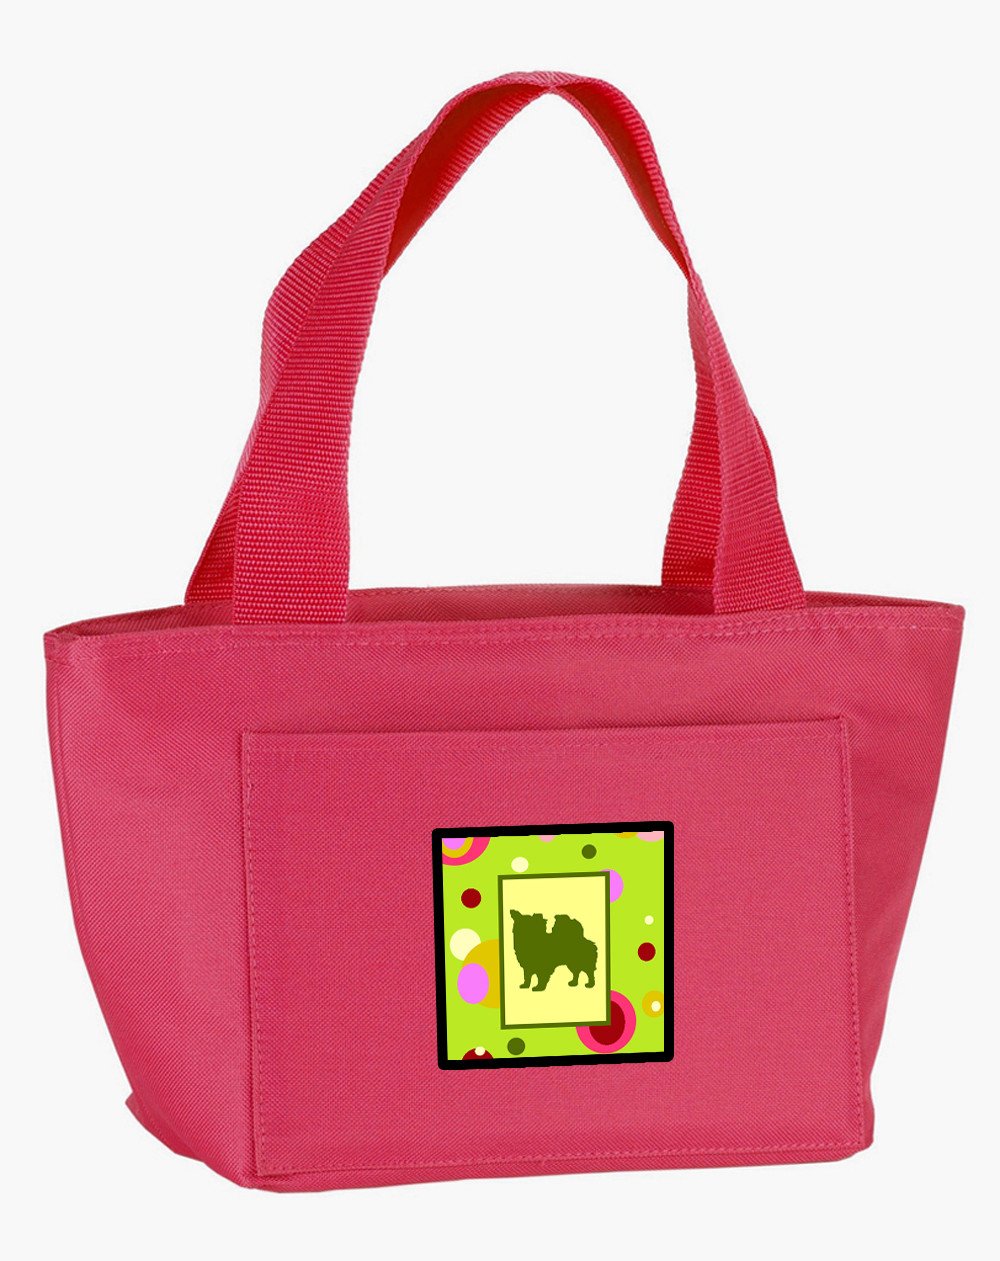 Lime Green Dots Chihuahua Lunch Bag CK1098PK-8808 by Caroline's Treasures